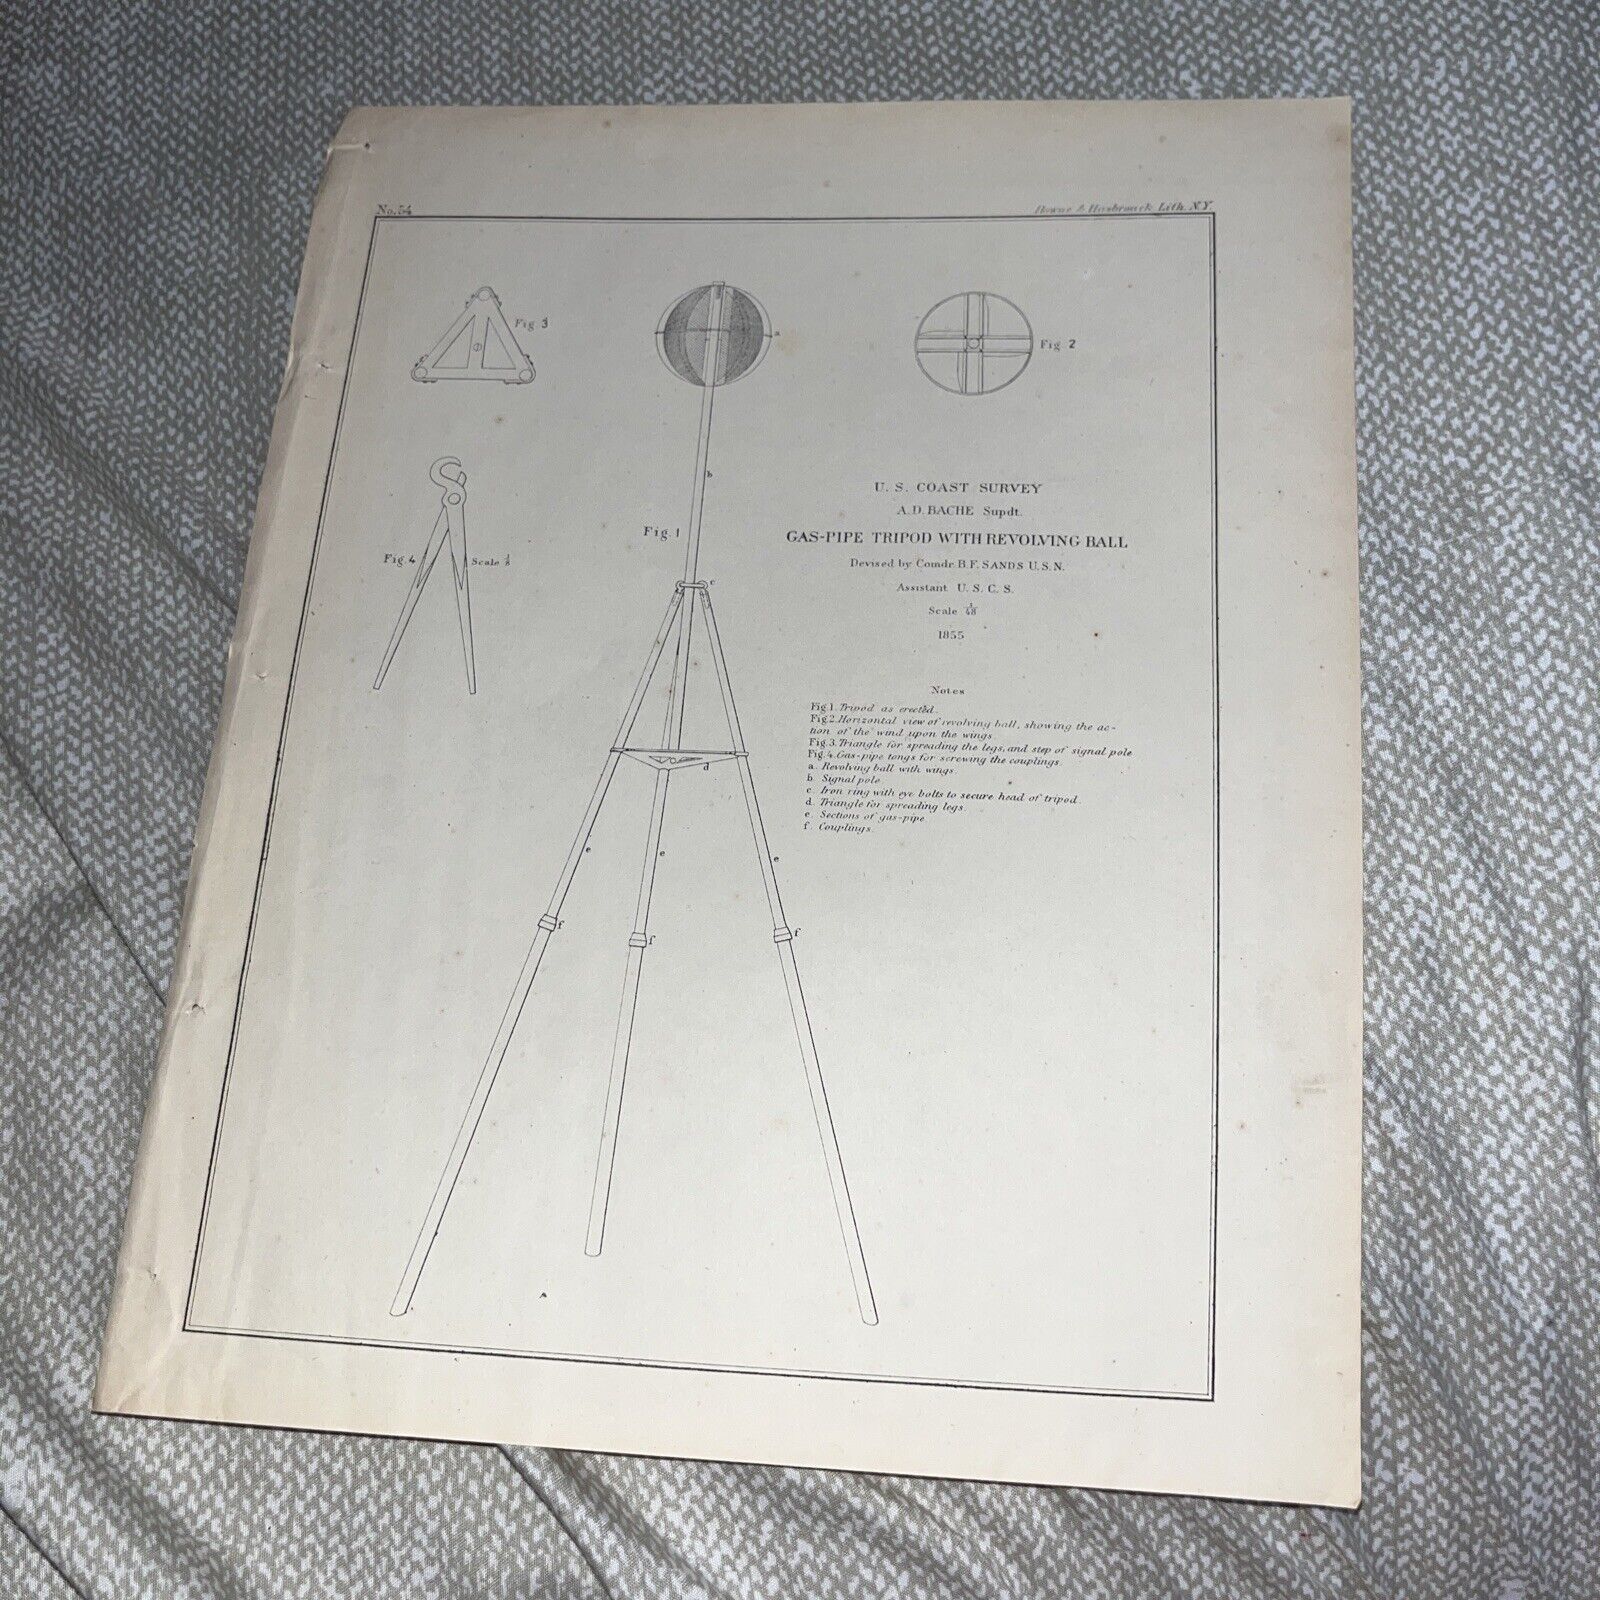 1855 US Coast Survey Lithograph: Gas-Pipe Tripod with Revolving Ball